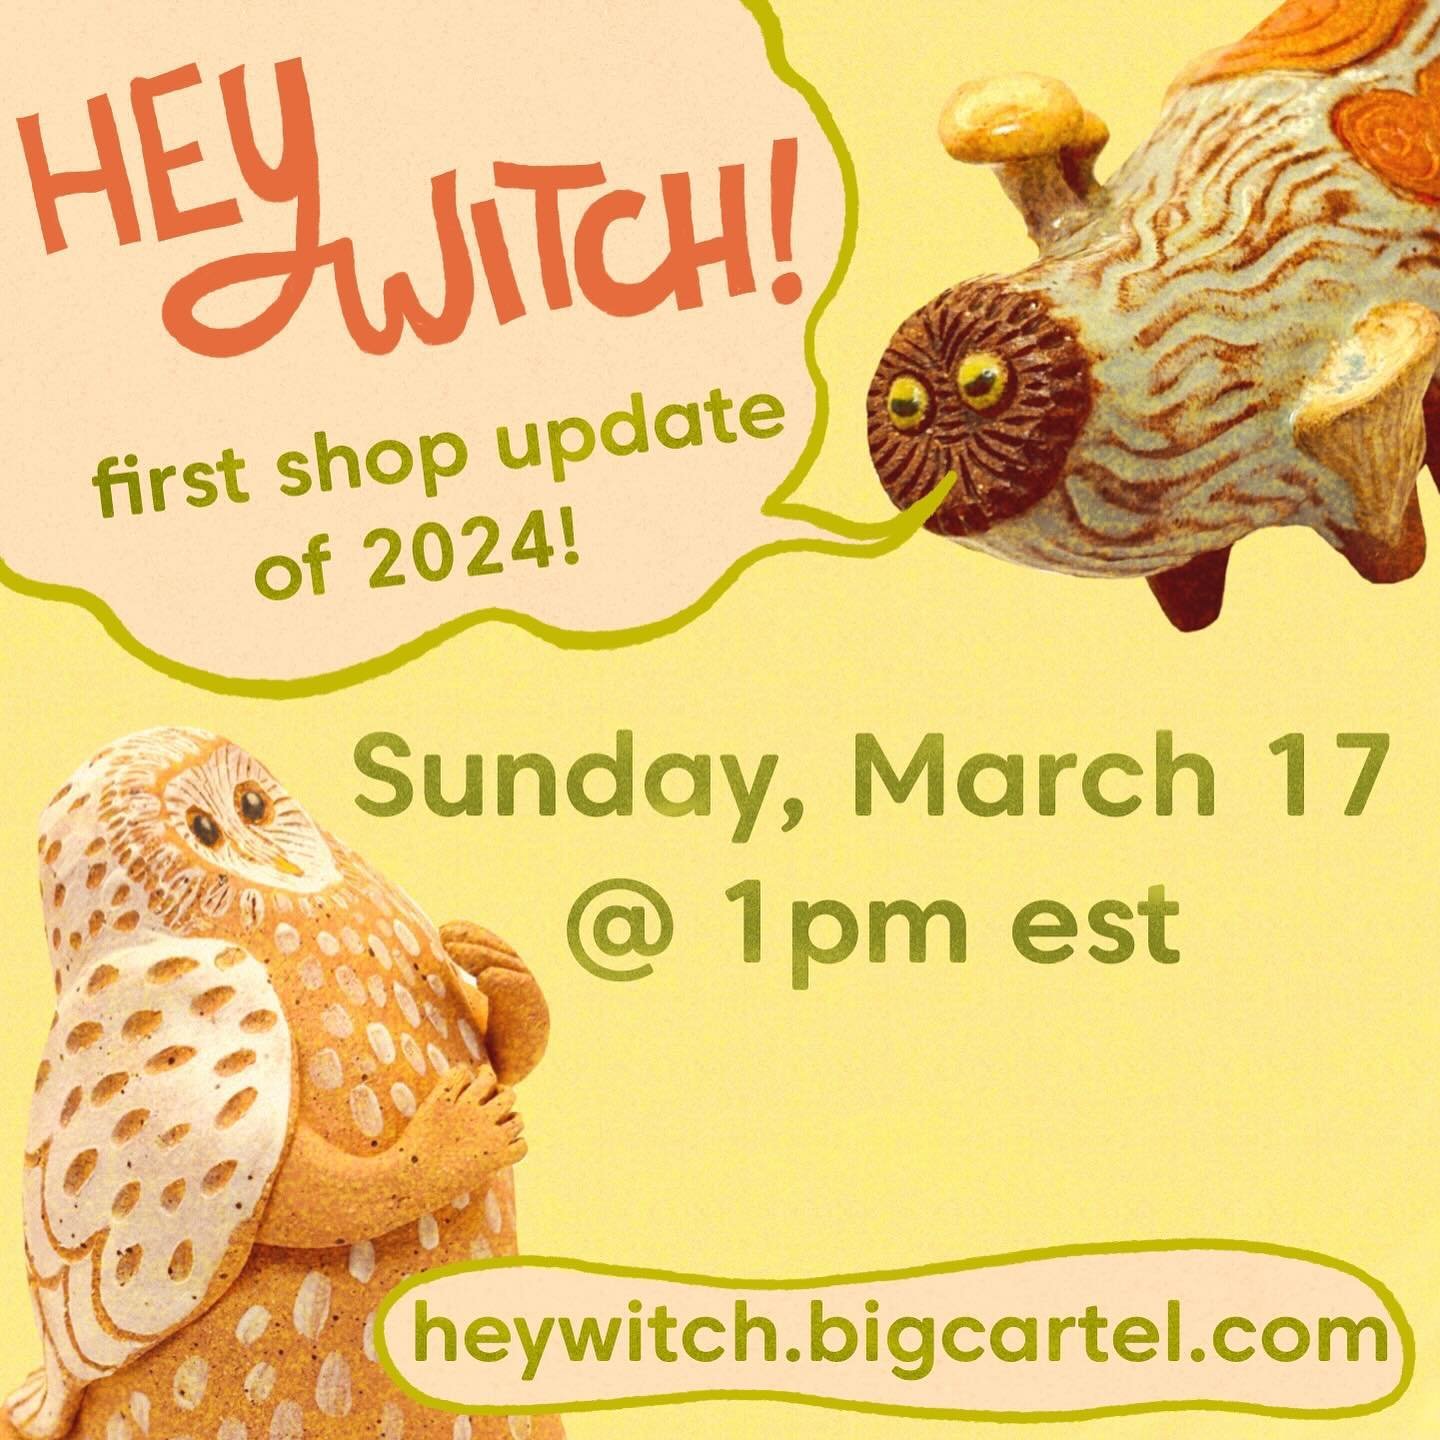 It&rsquo;s finally happening!! My shop reopens on Sunday, March 17th at 1pm est for the first of two early-spring updates! I&rsquo;ve already started uploading previews to my shop (heywitch.bigcartel.com &mdash; see bio for link) &amp; will be adding